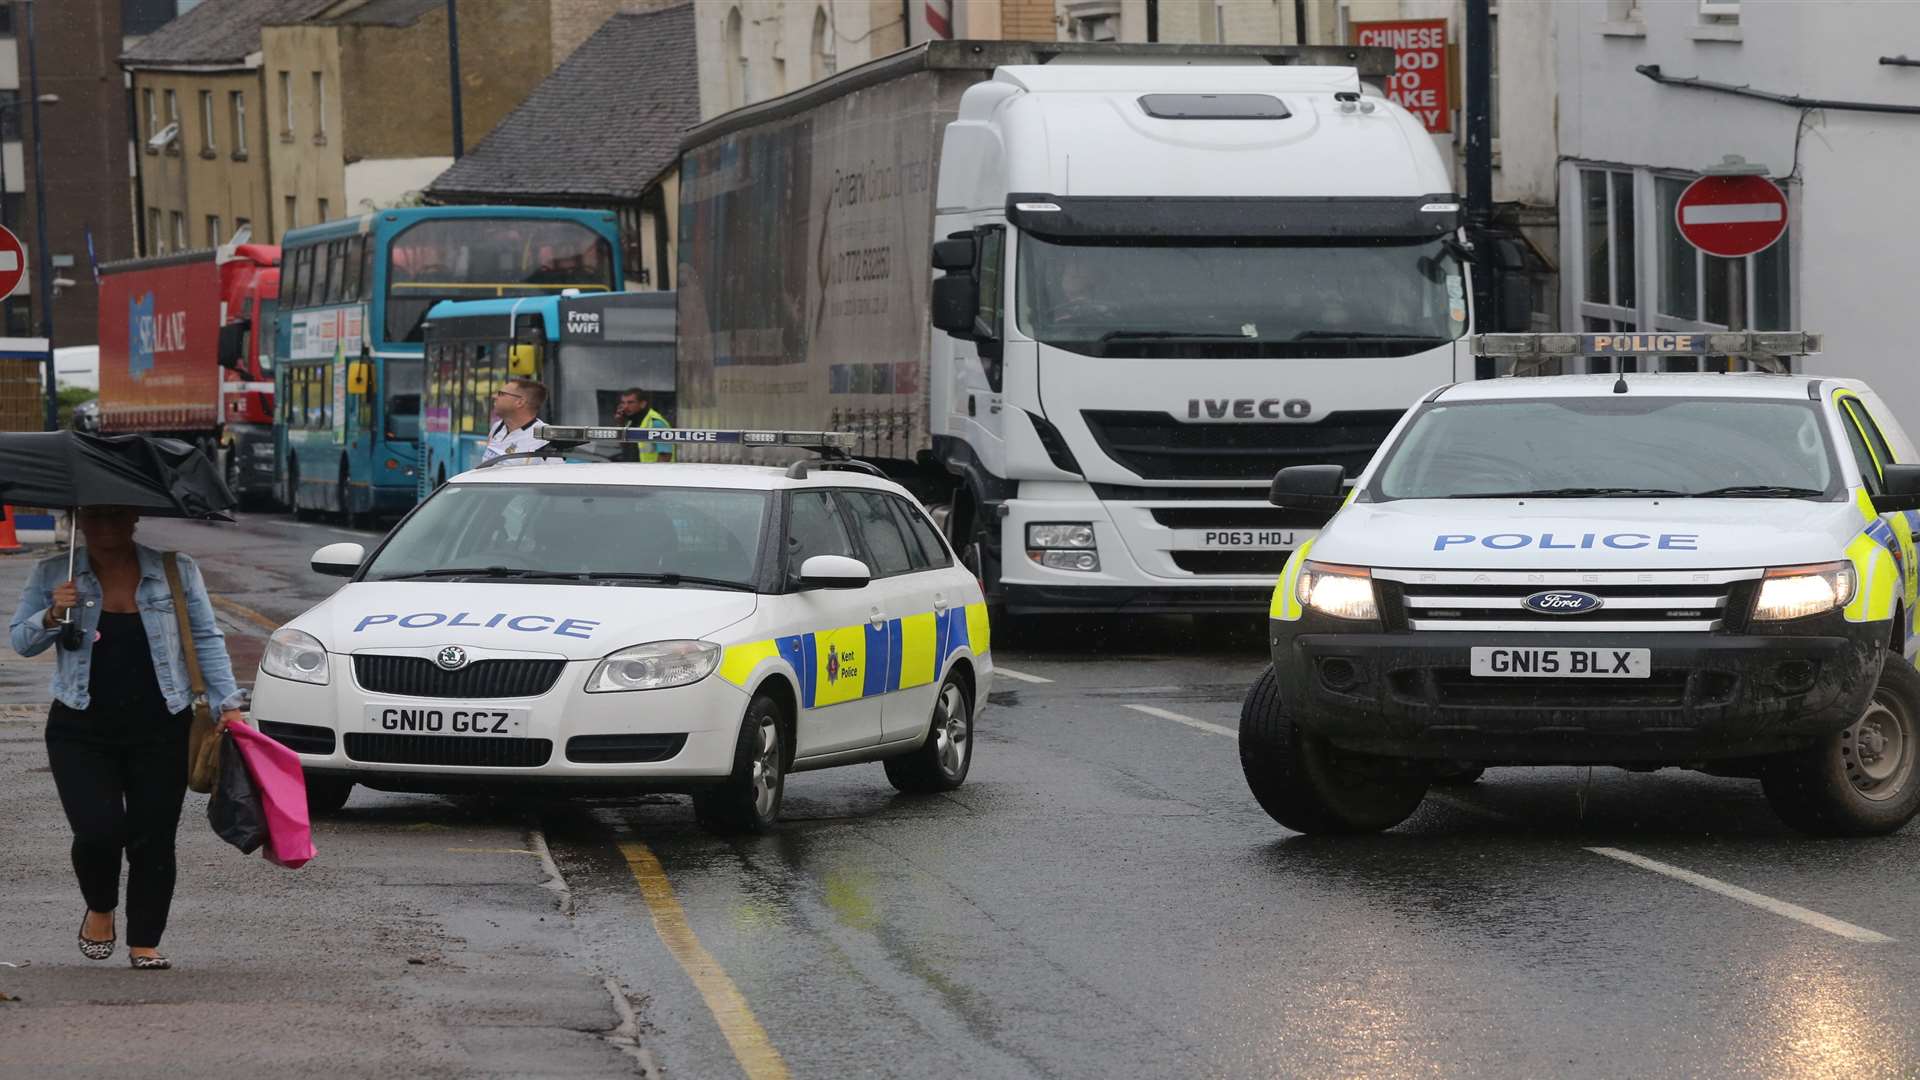 A police blockade was set up. Picture: John Westhrop